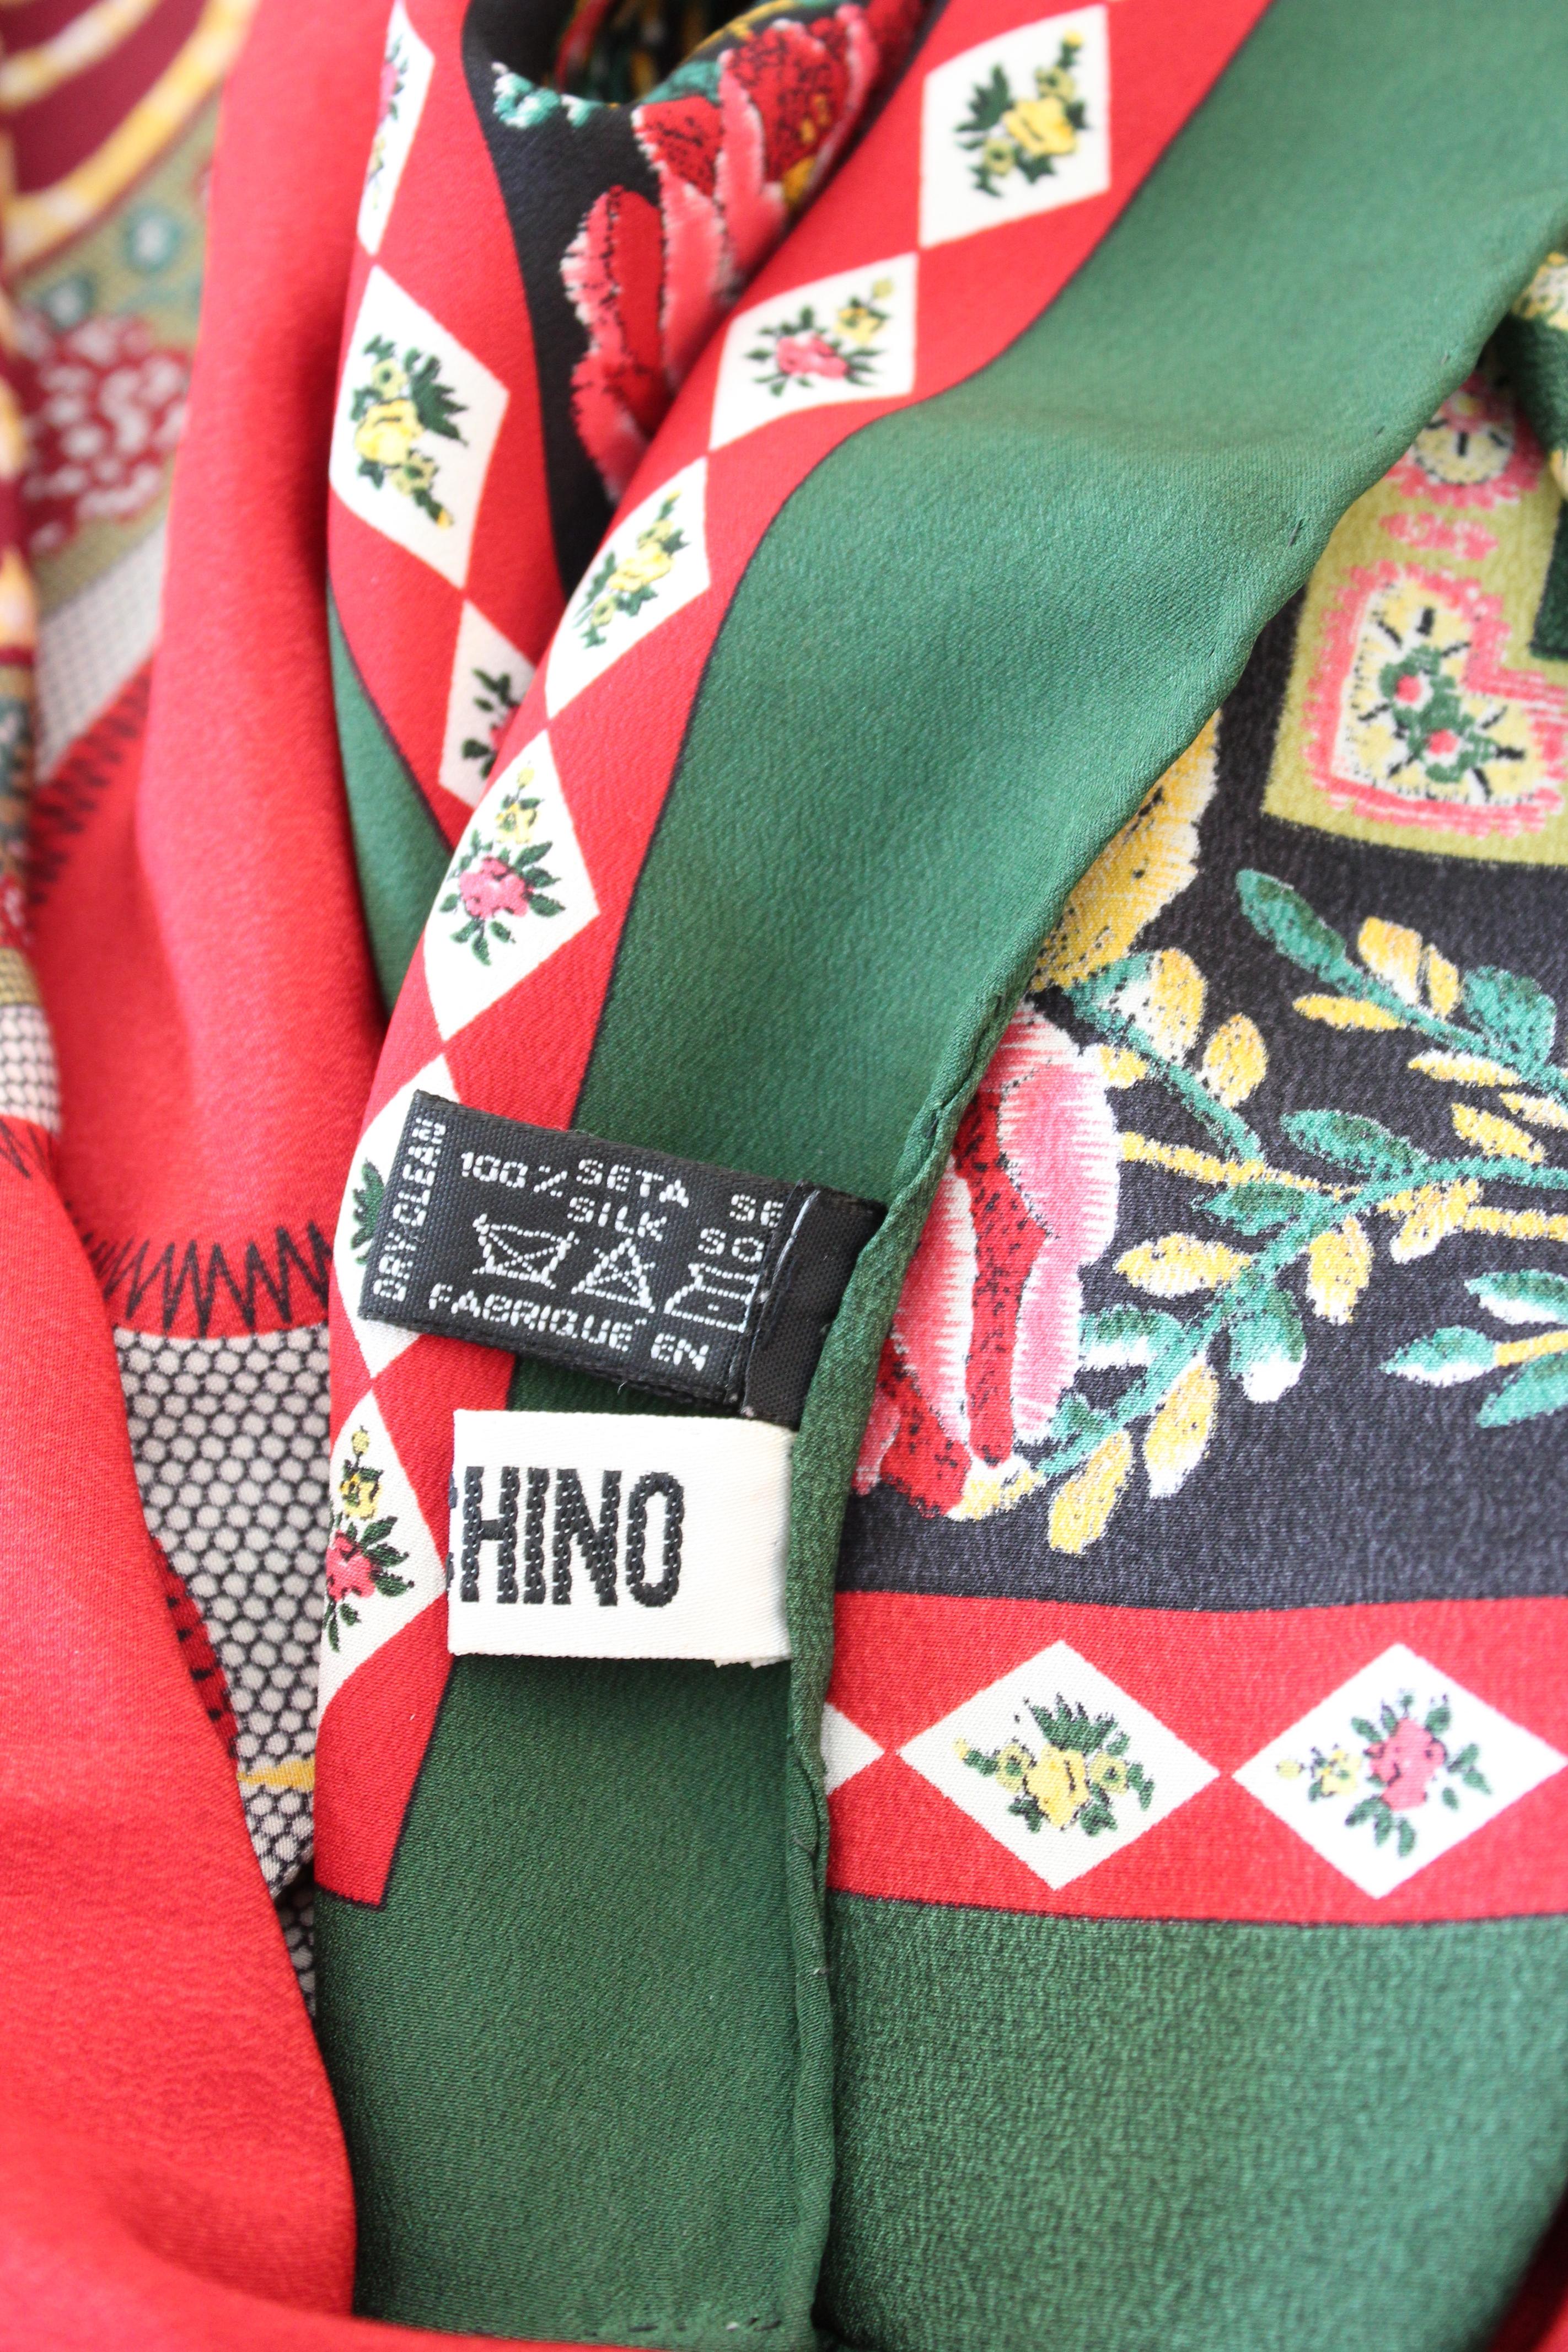 Moschino vintage 90s scarf. Large red and green foulard with floral designs and four large central hearts. 100% silk fabric. Made in Italy.

Condition: Very good.

Item in excellent condition. There are small spots.

Measures: 86 x 86 cm